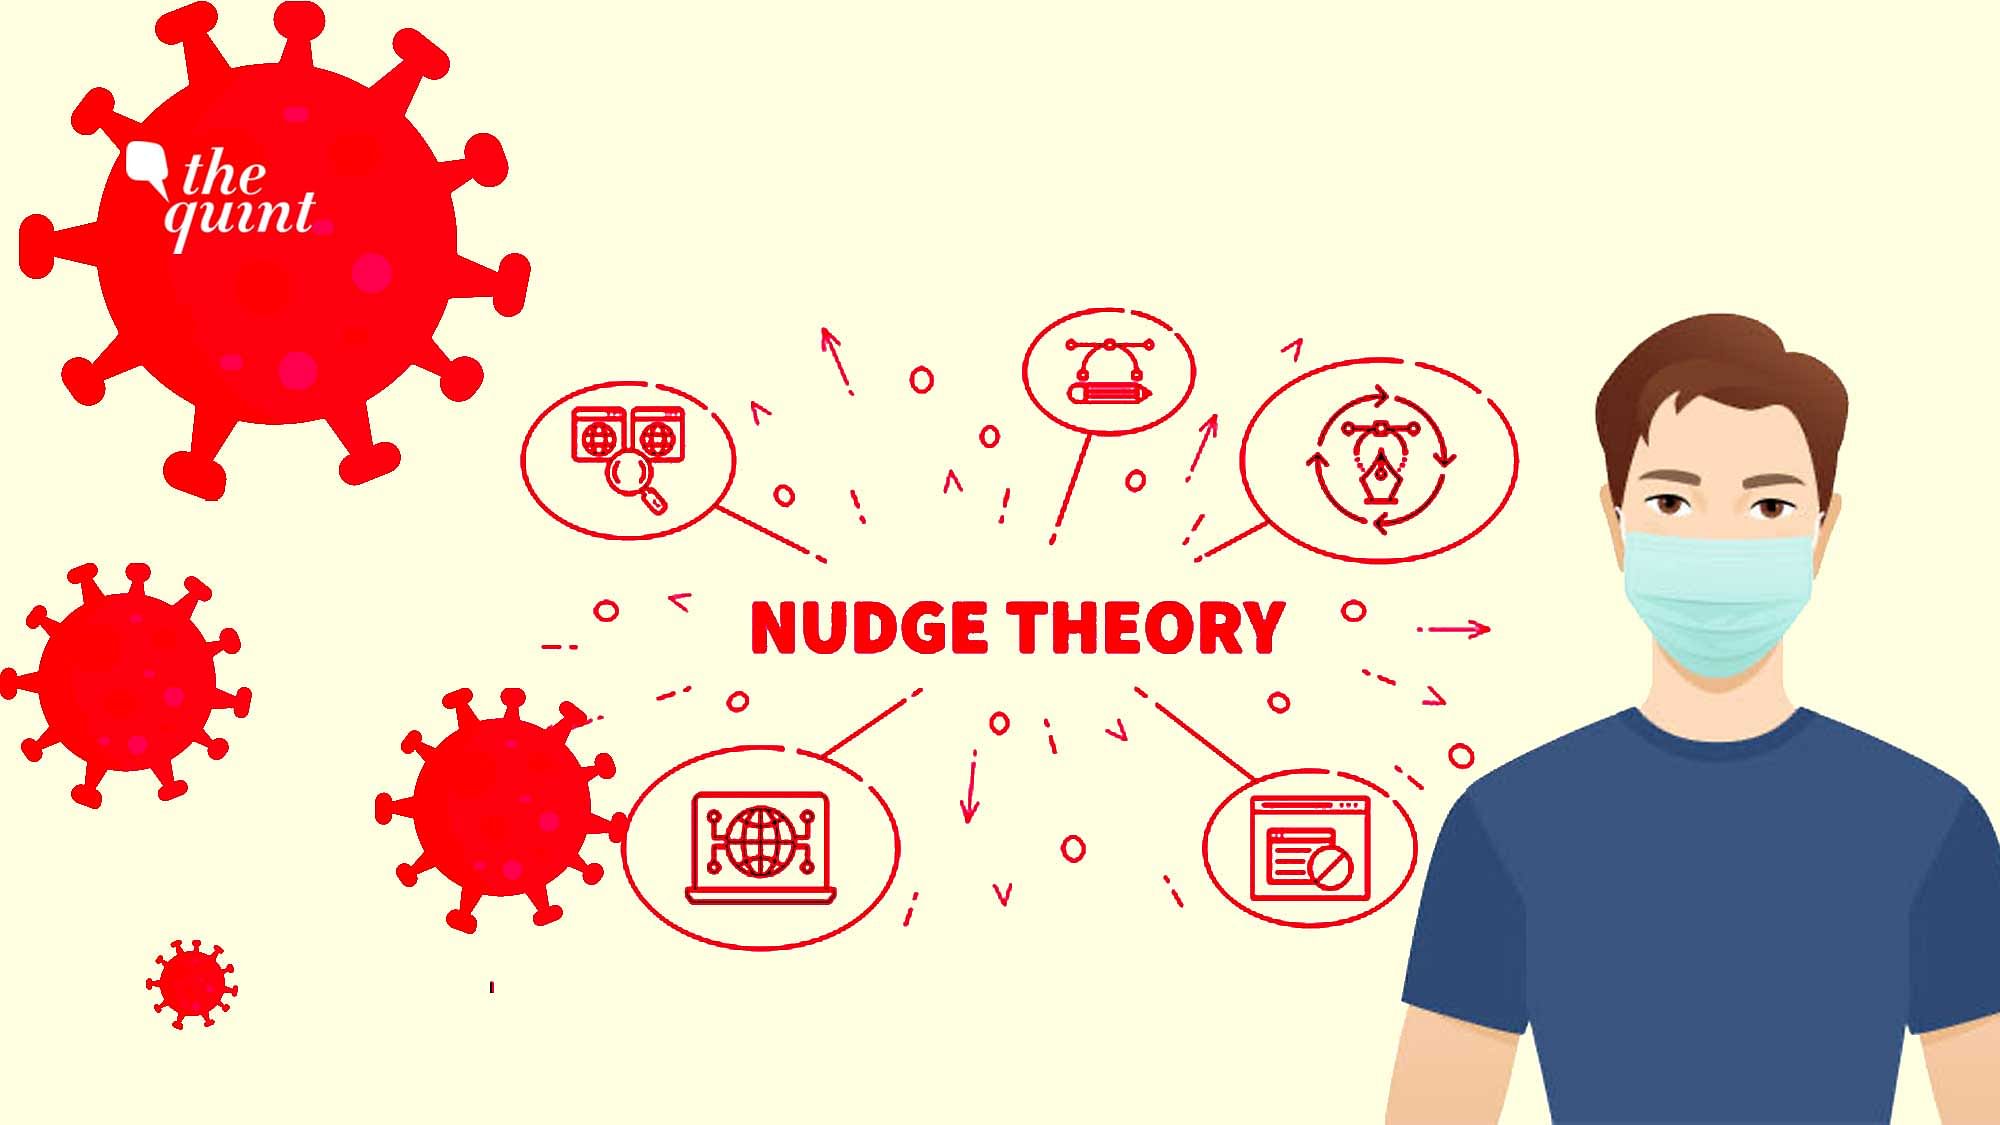 Nudge theory can prove to be beneficial for India’s vaccination drive, allowing people time to think and evaluate.